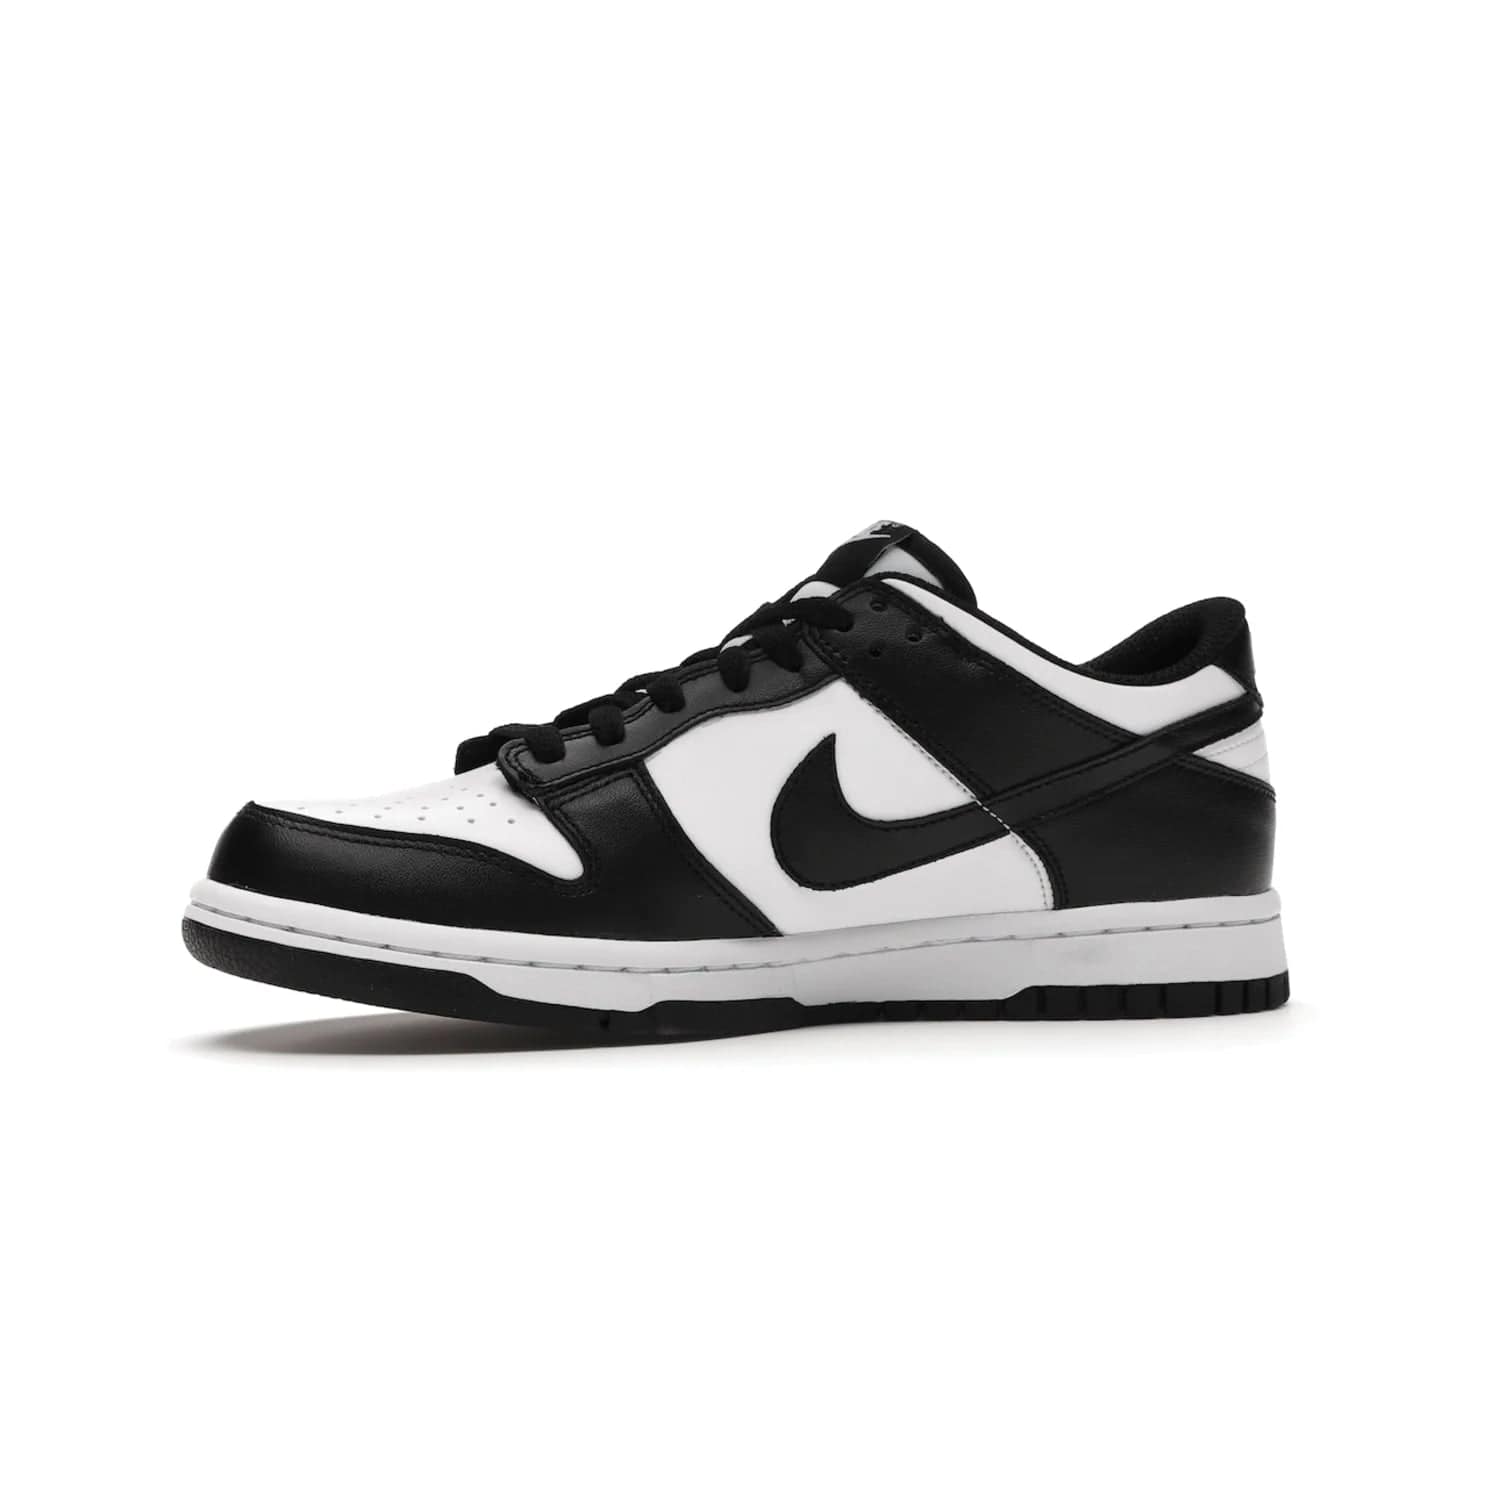 Nike Dunk Low Retro White Black Panda (2021) (GS) - Image 17 - Only at www.BallersClubKickz.com - Upgrade your style with the Nike Dunk Low Retro White Black (GS). Featuring premium leather, iconic Nike text, signature Swoosh logo and striking black/white colorway, this striking silhouette is the perfect mix of style and comfort. Colorway released in March 2021.